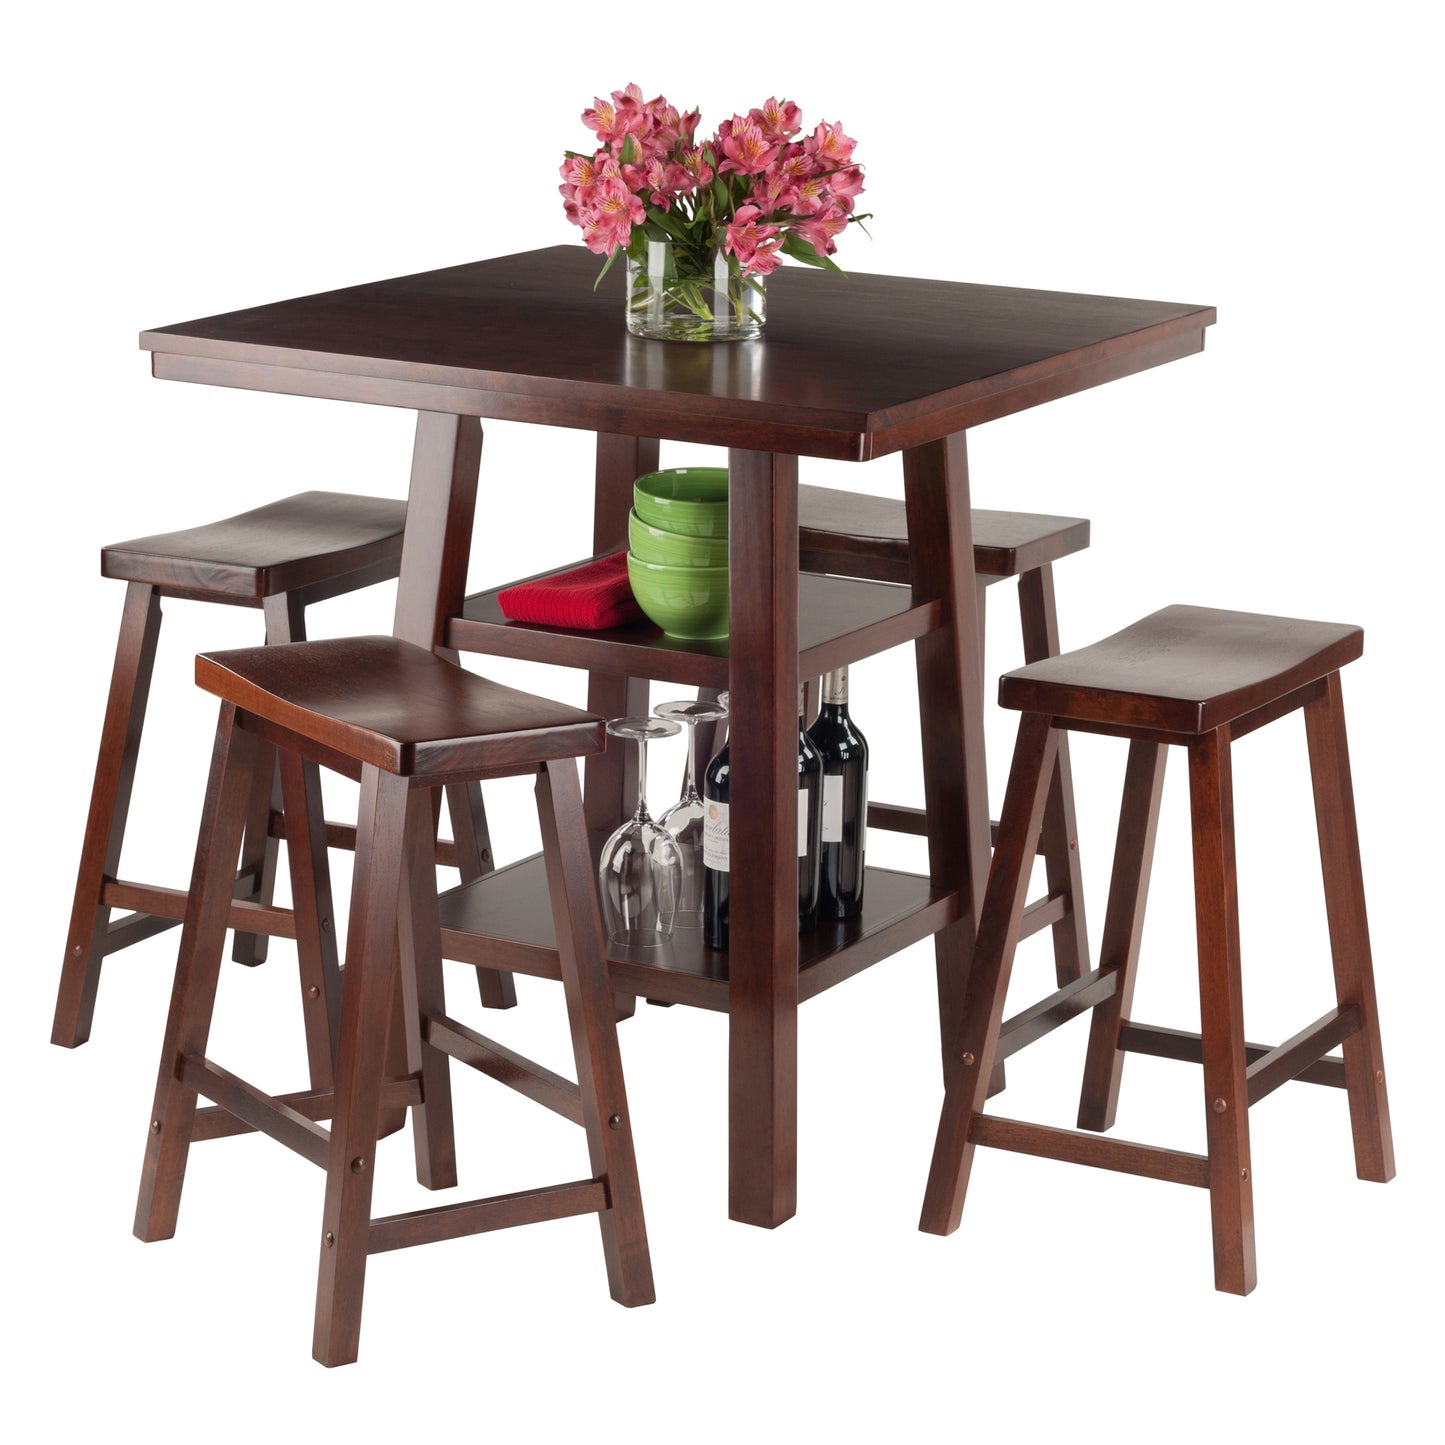 Orlando 5-Pc High Table with Saddle Seat Counter Stools, Walnut